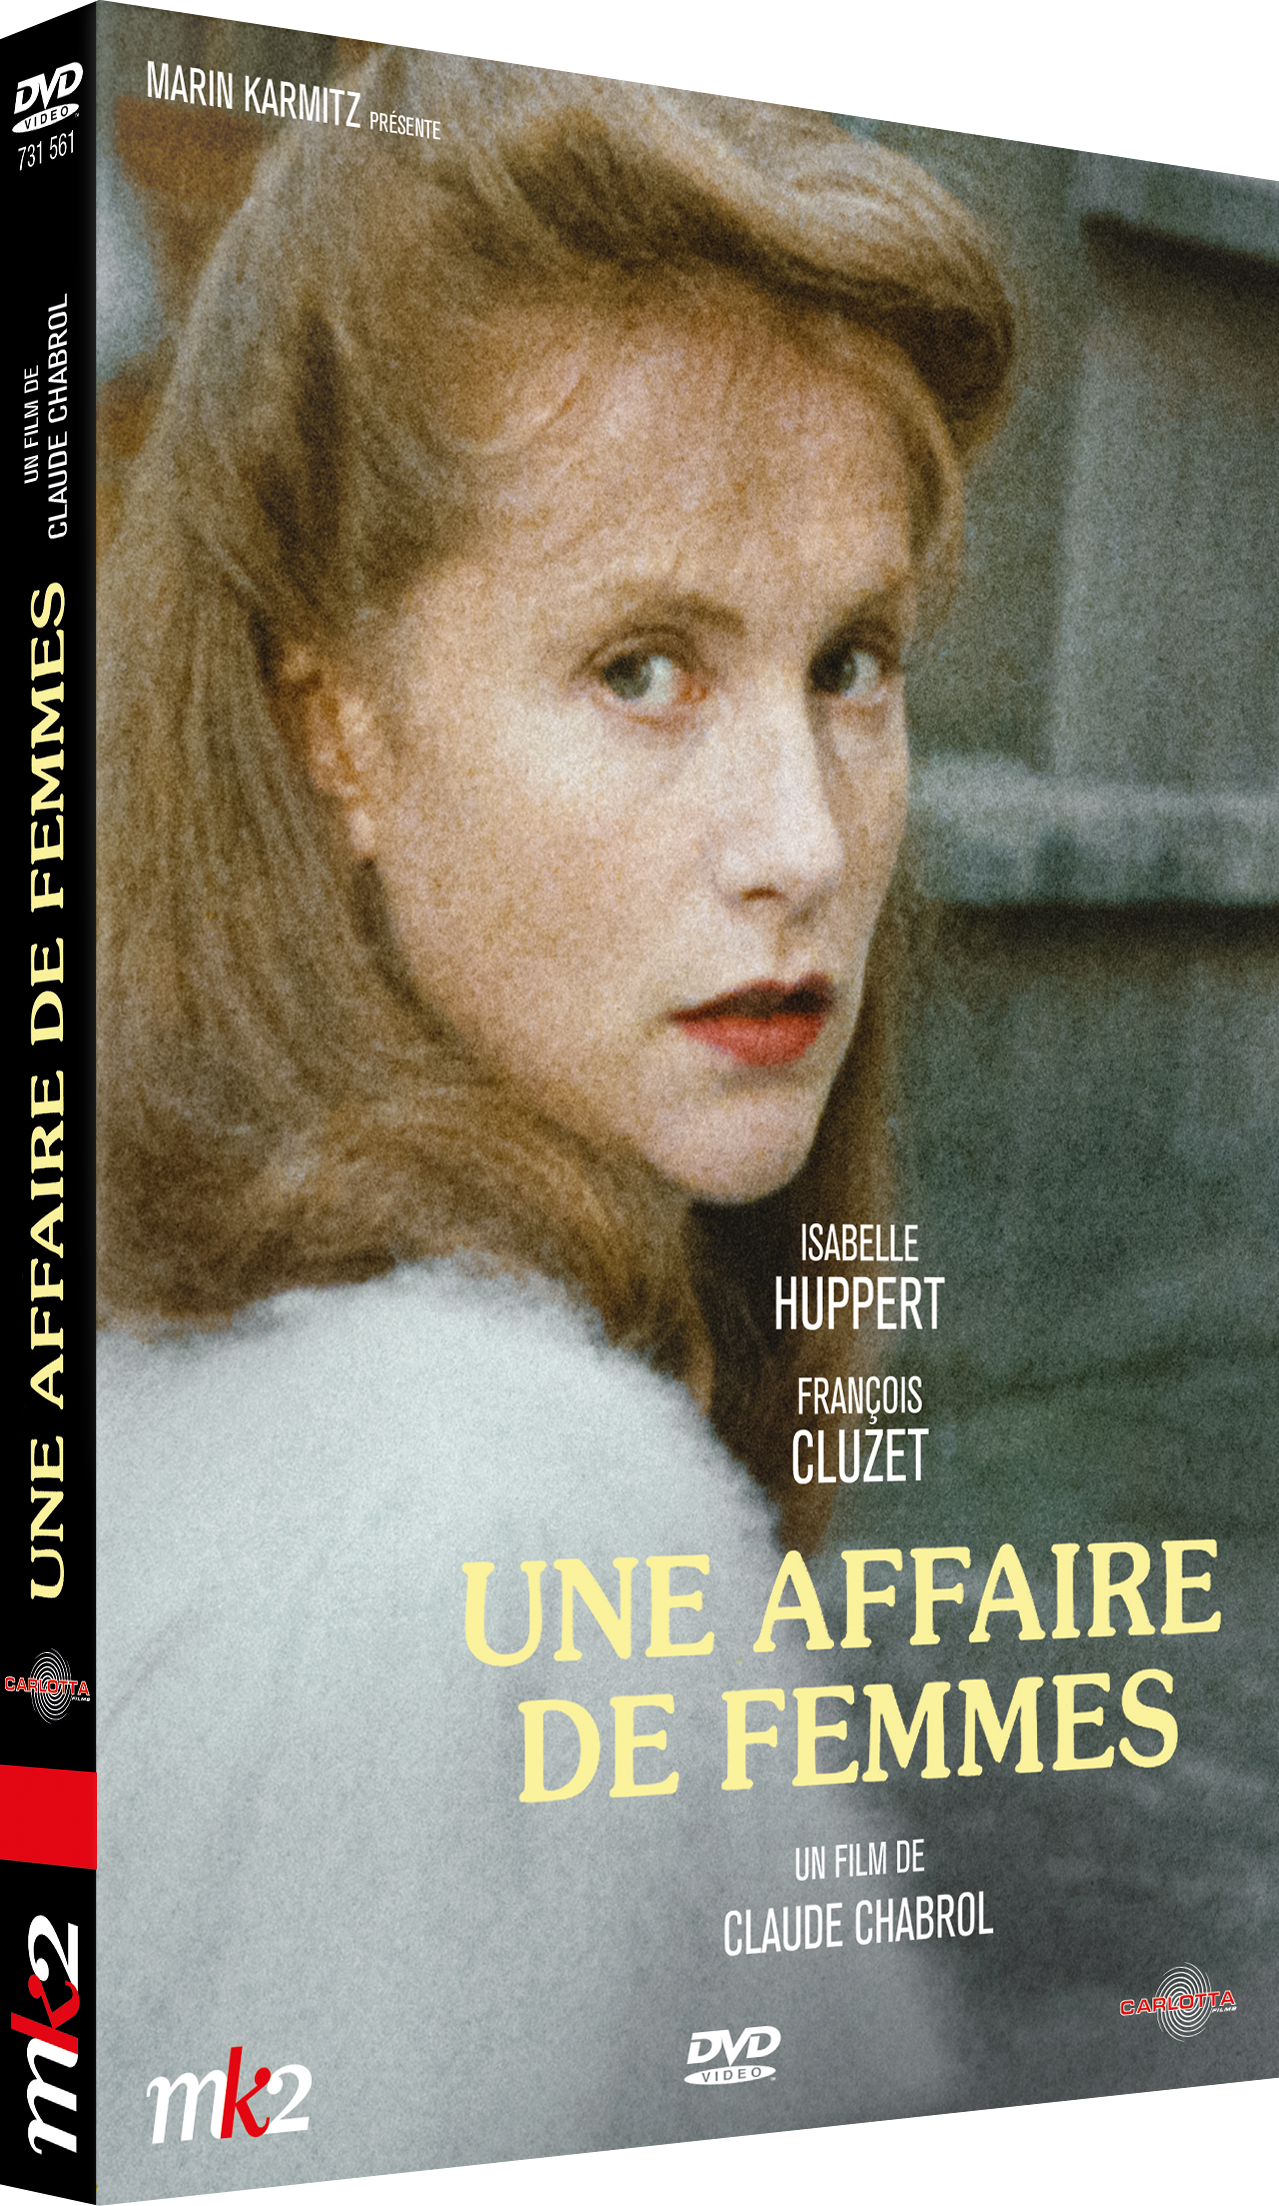 A Women's Affair by Claude Chabrol